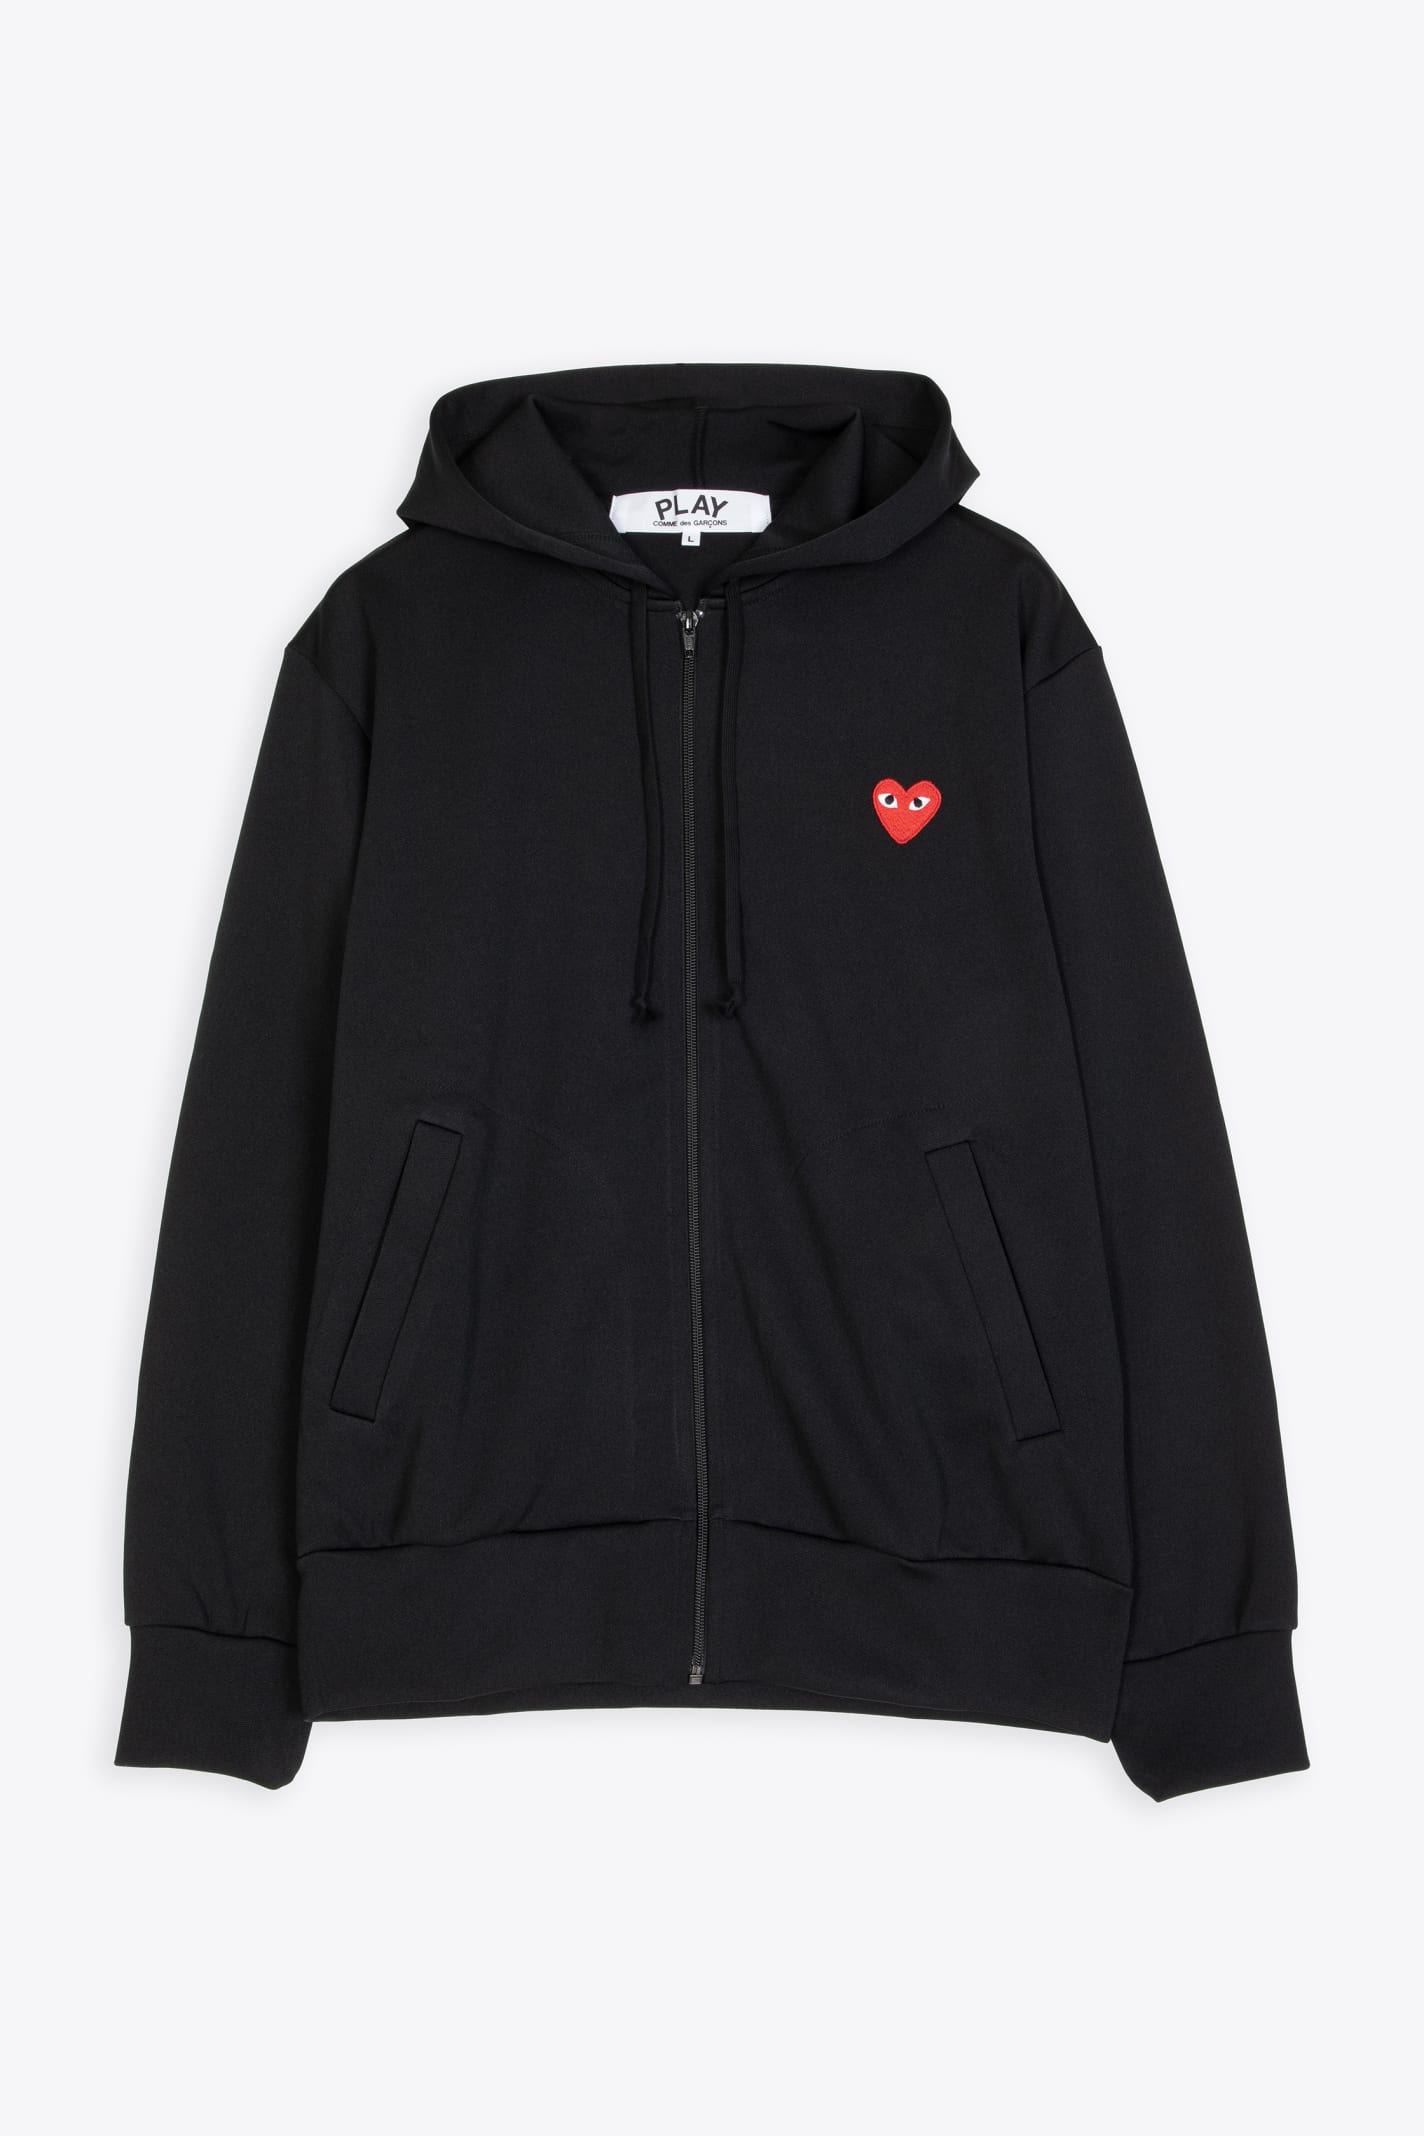 Comme des Garçons Play Mens Sweatshirt Knit Black hoodie with zip and heart patch at chest